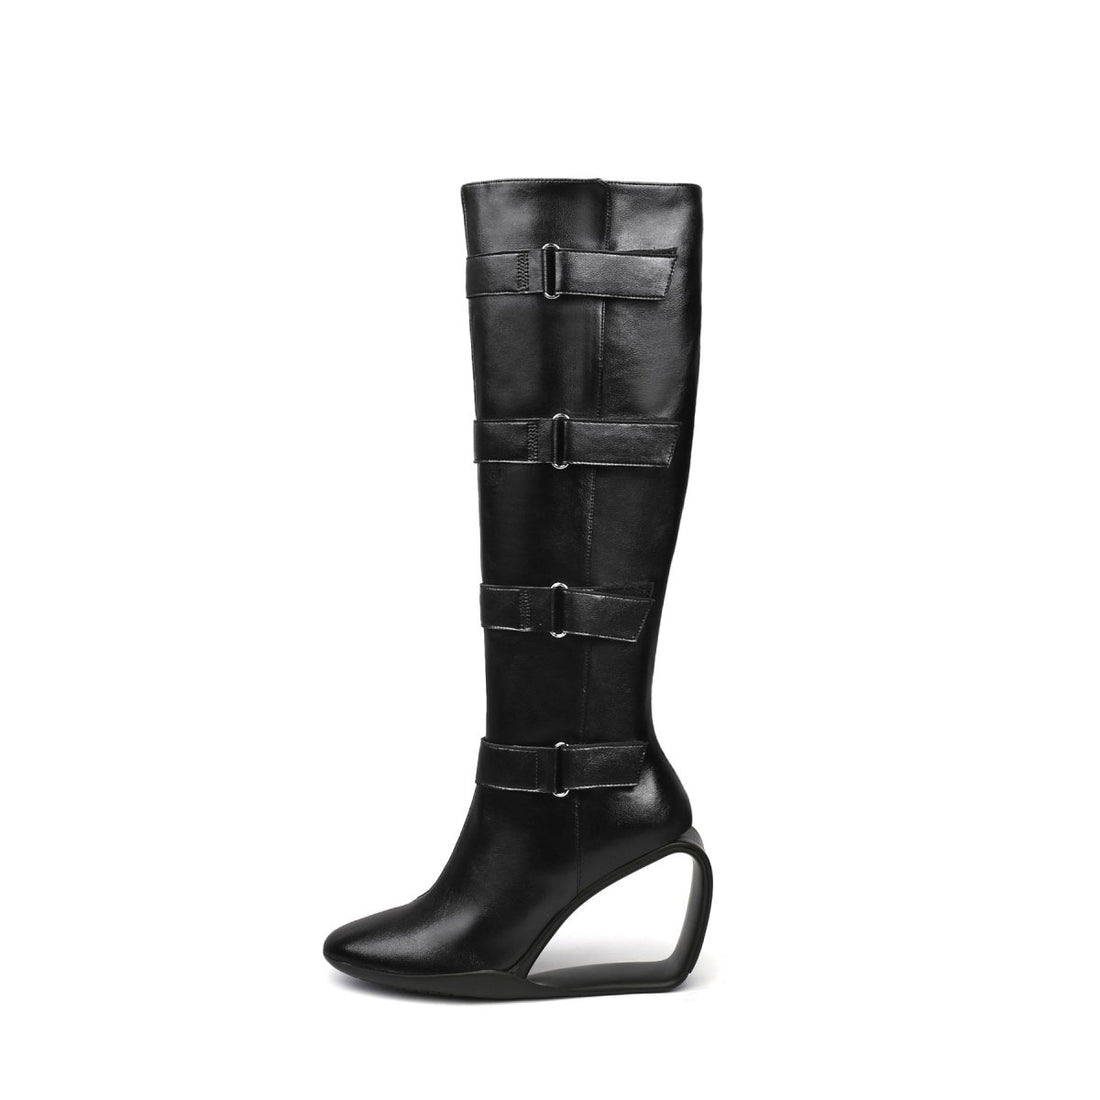 Strap Yourself In Black Knee-High Boots - 0cm